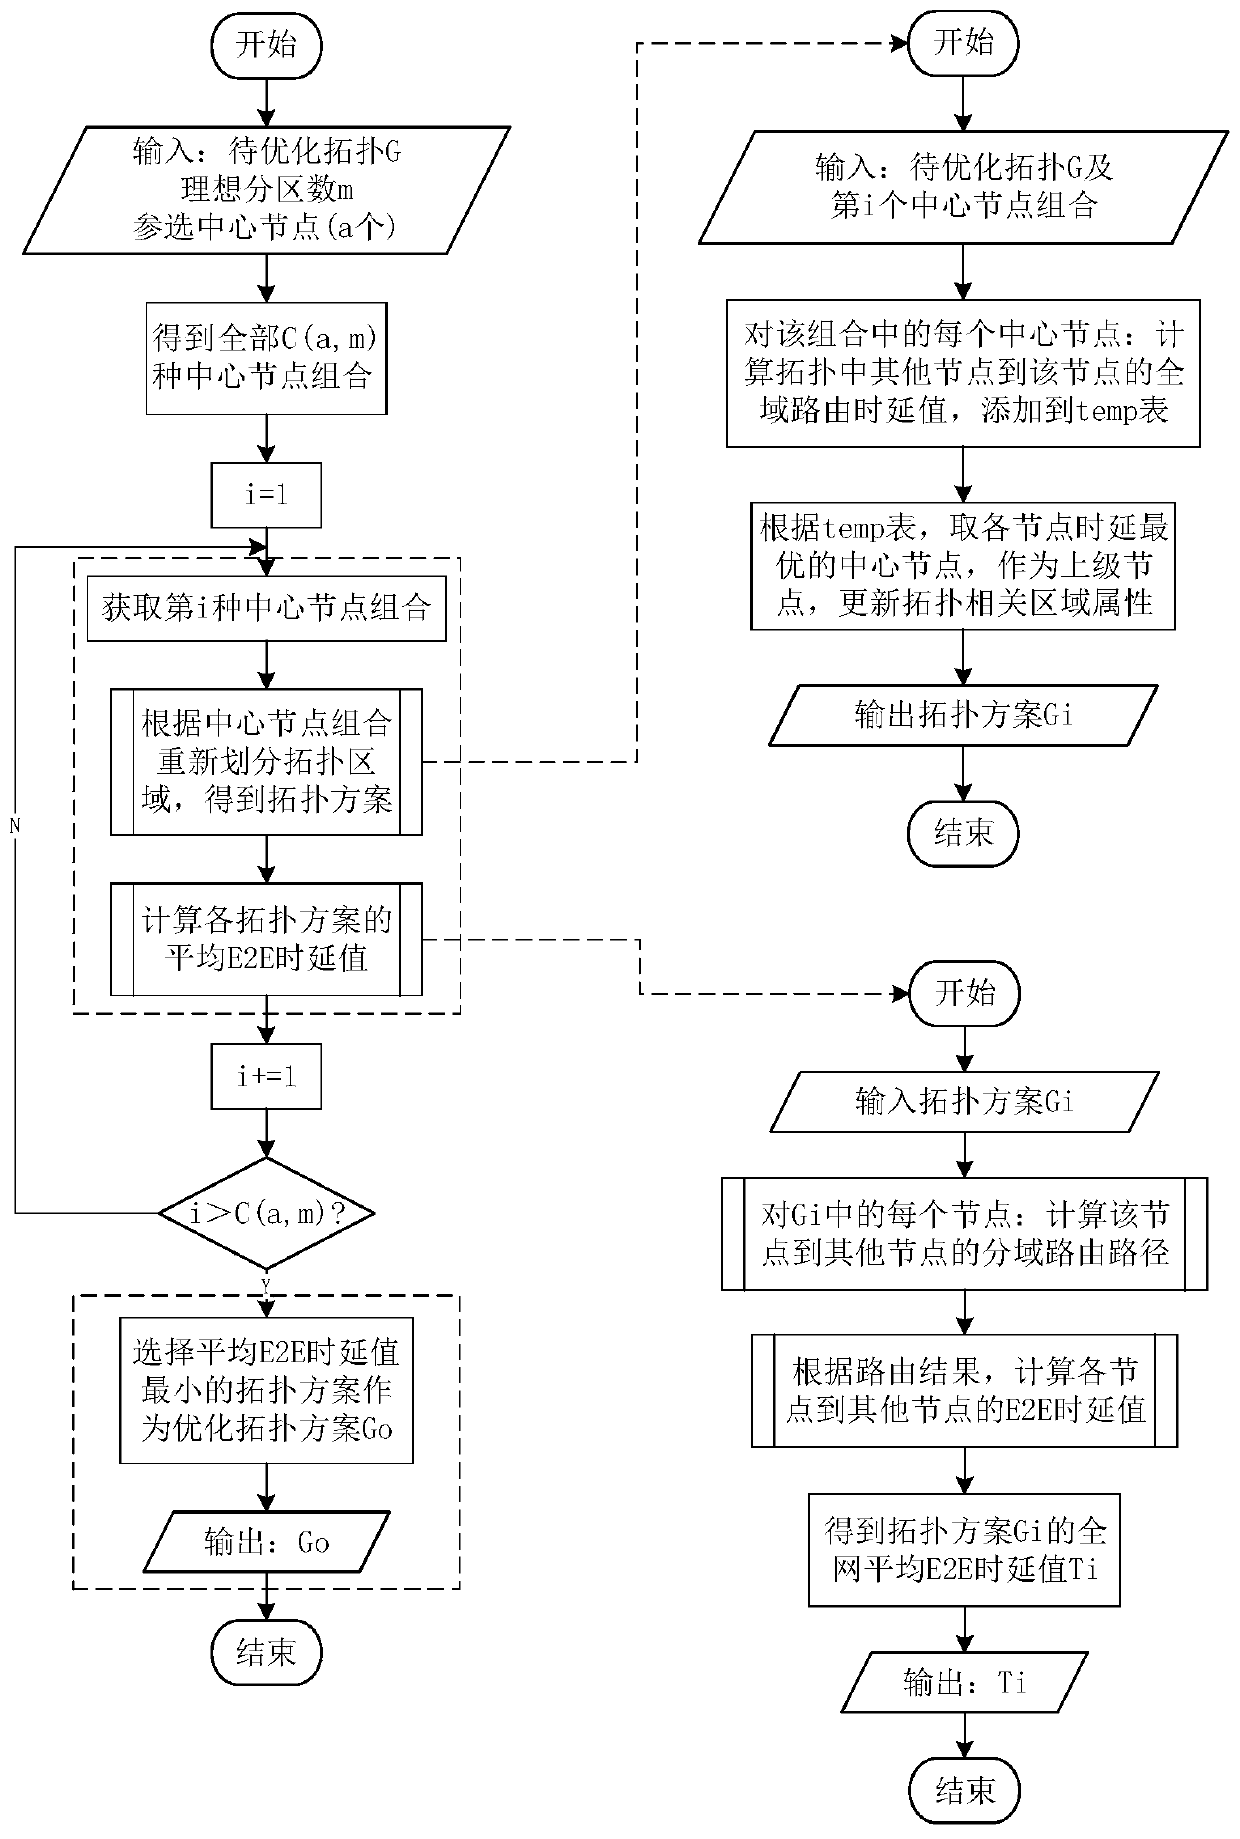 Network domain partitioning method for reducing end-to-end time delay of optical transport network